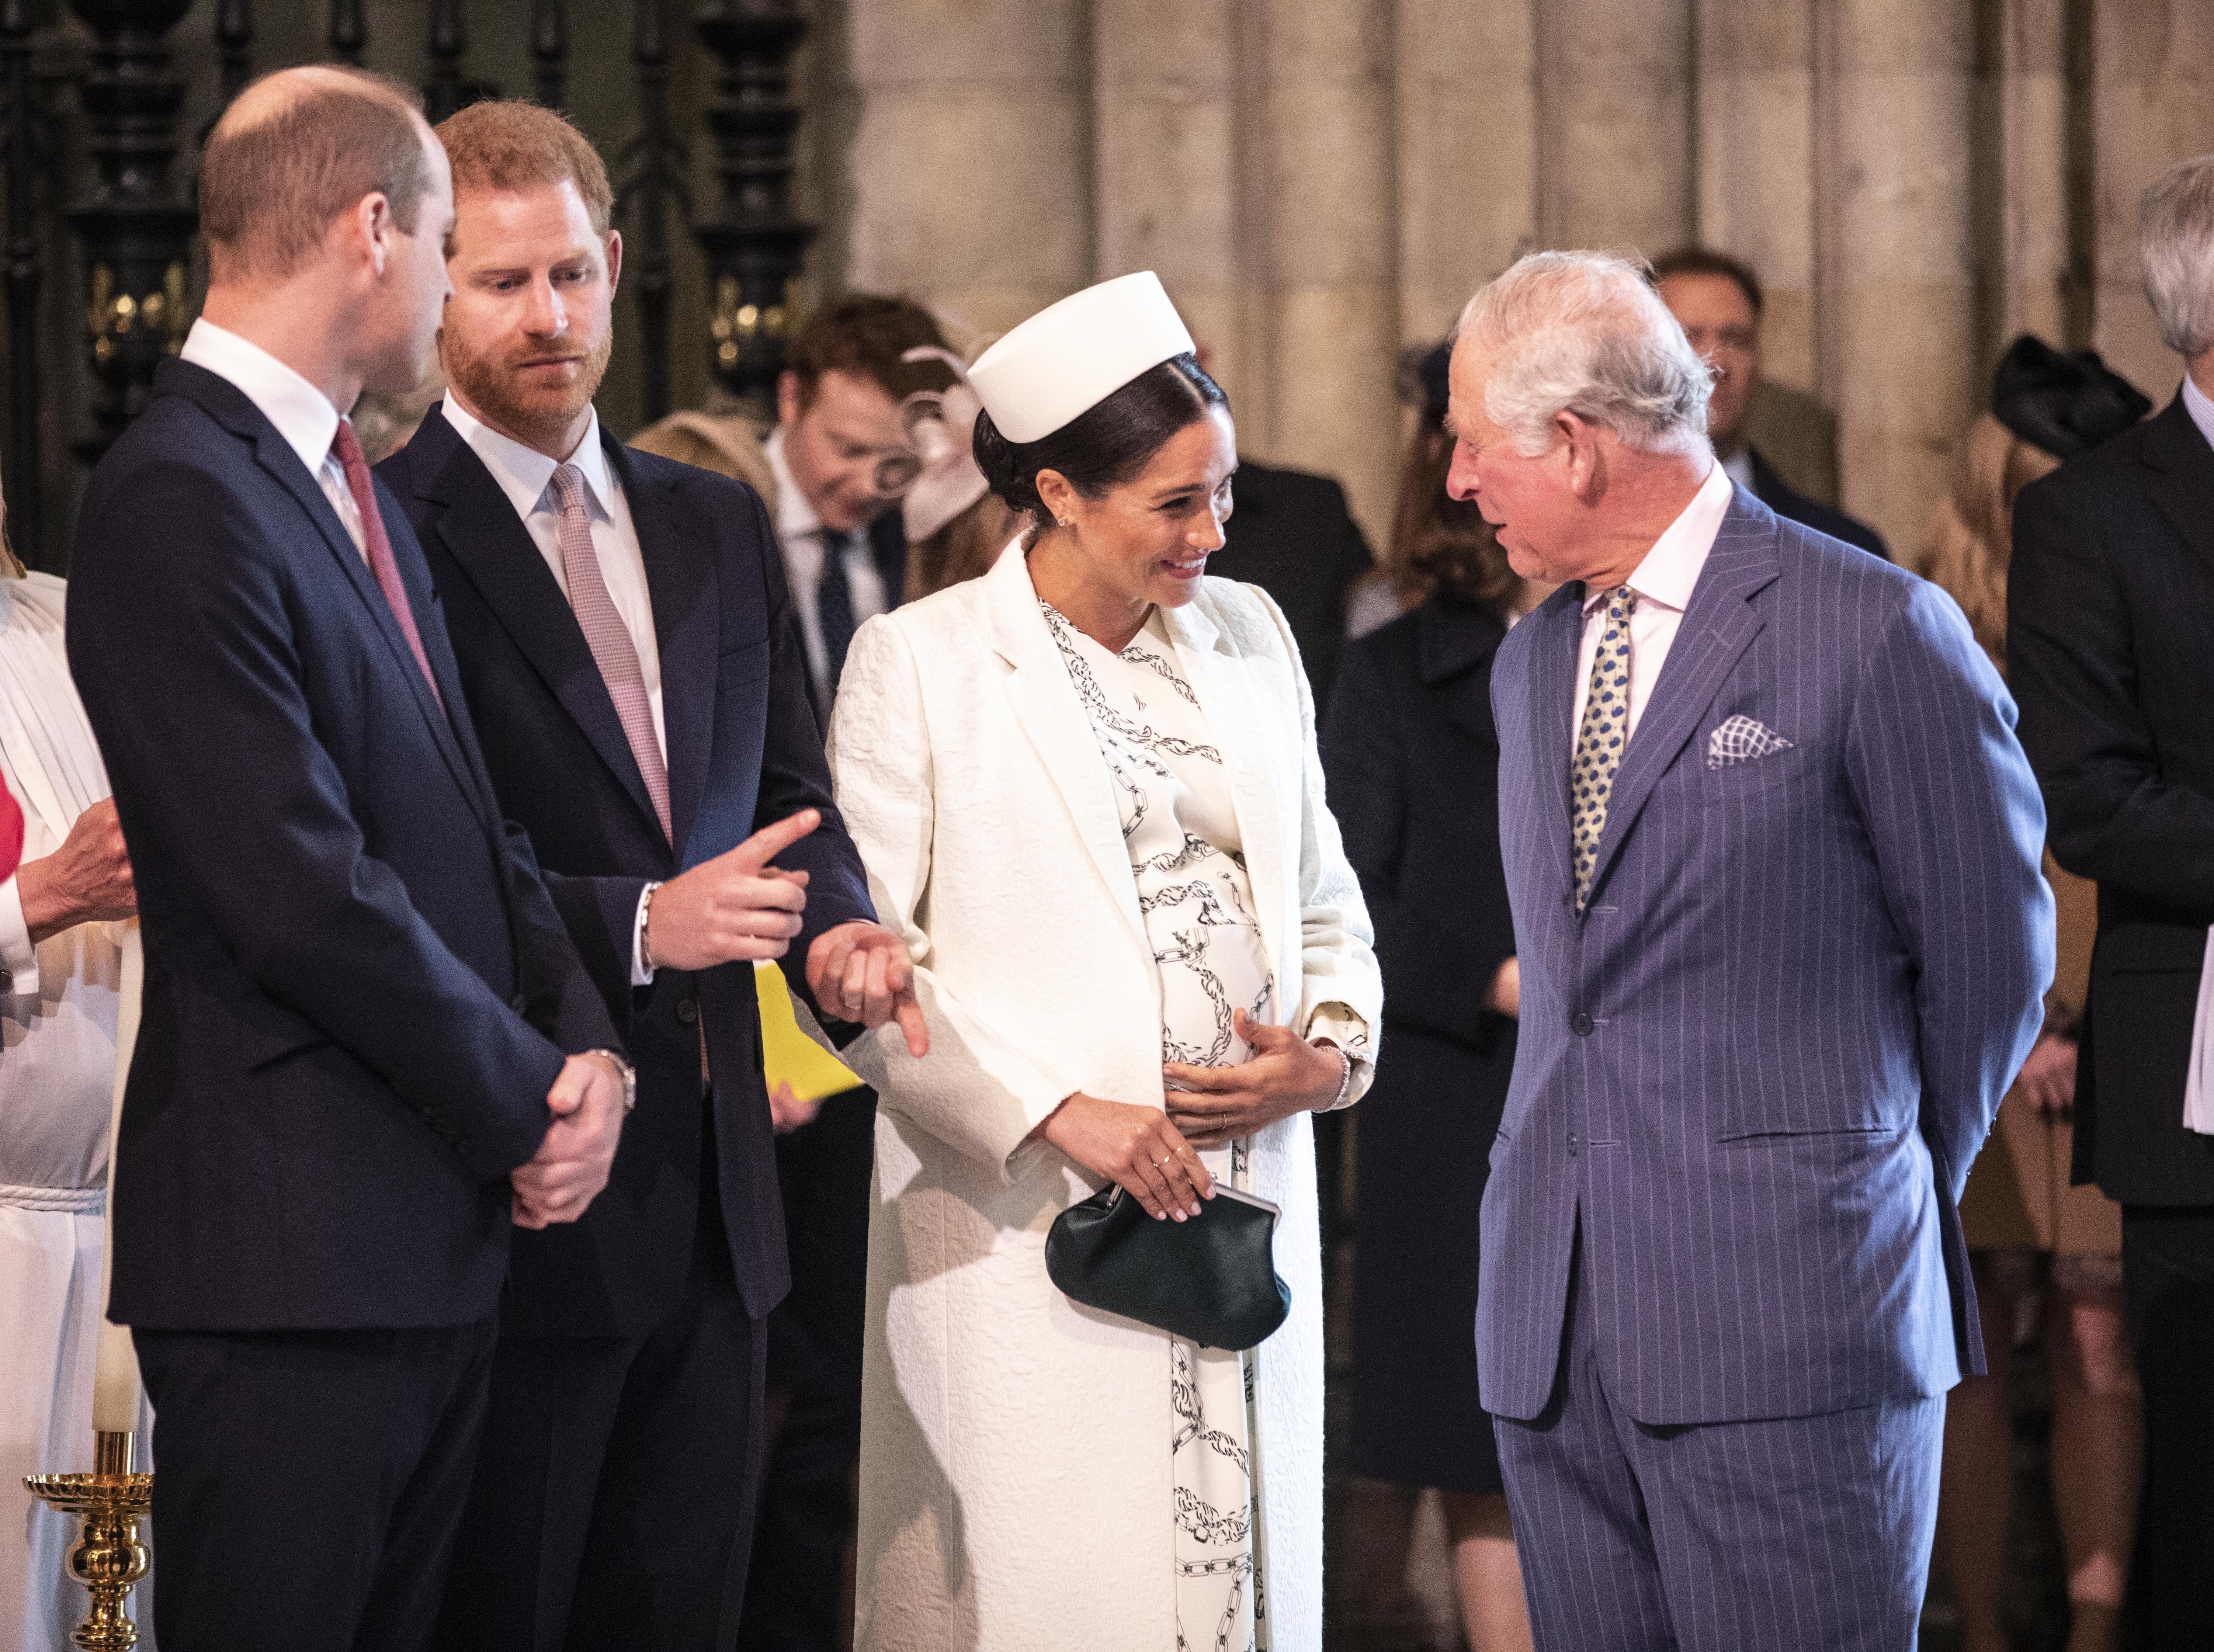 Meghan, Duchess of Sussex pictured conversing with Prince Charles at the Westminster Abbey Commonwealth day service on March 11, 2019 in London, England. / Source: Getty Images